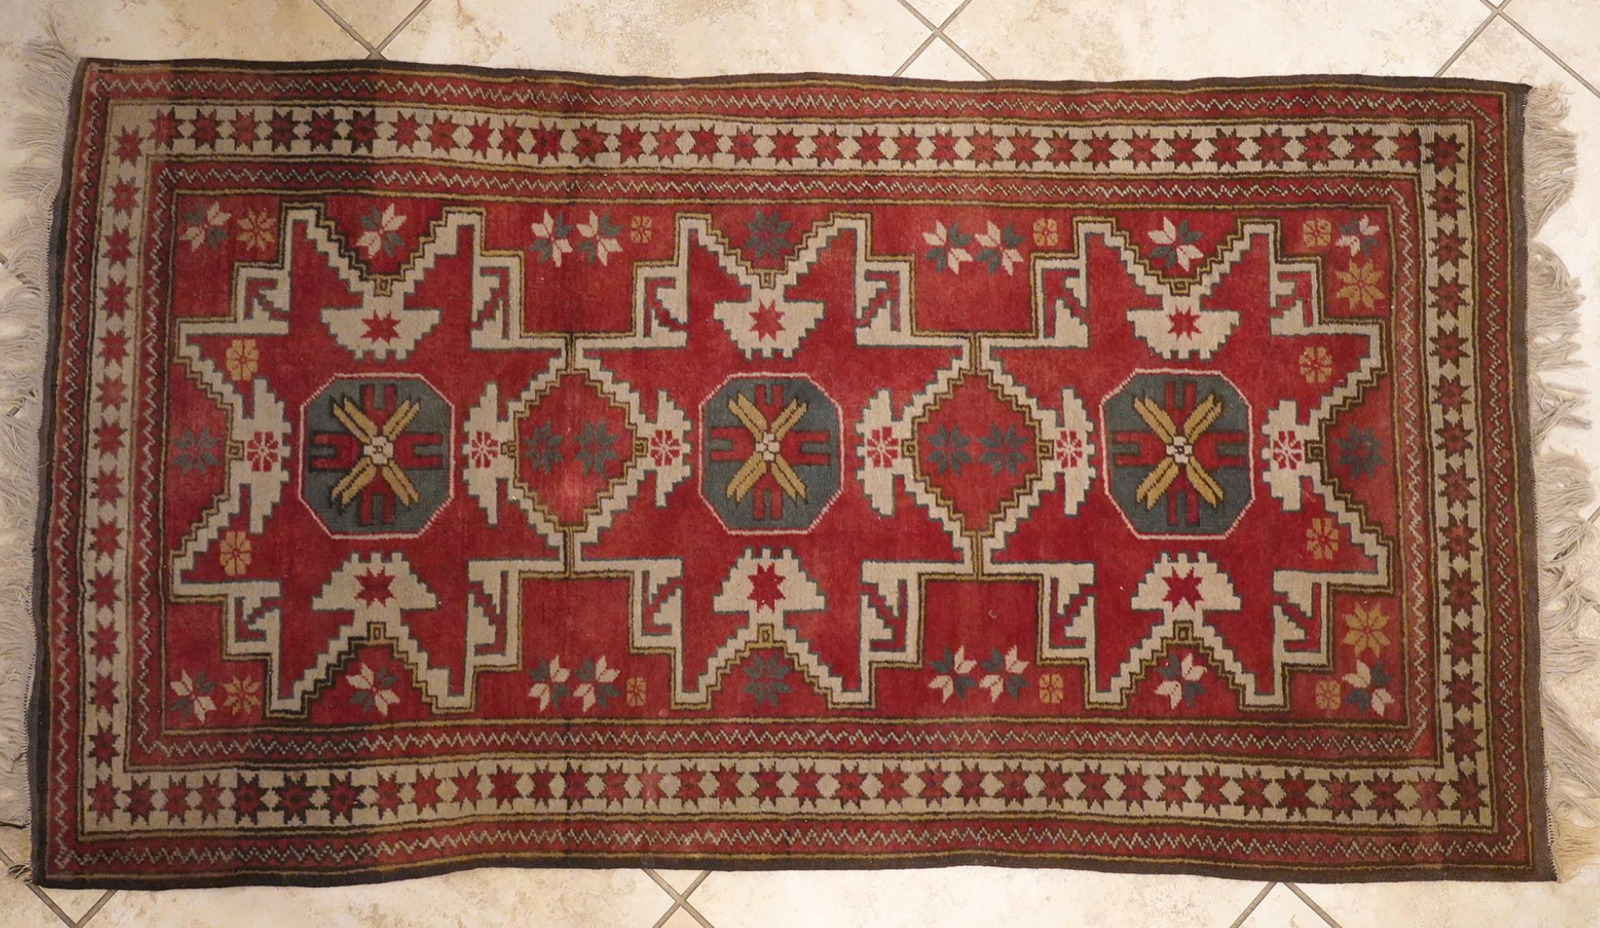 Kazak rug hand knotted, late 20 c, very good condition, 77 x 11 in with fringe